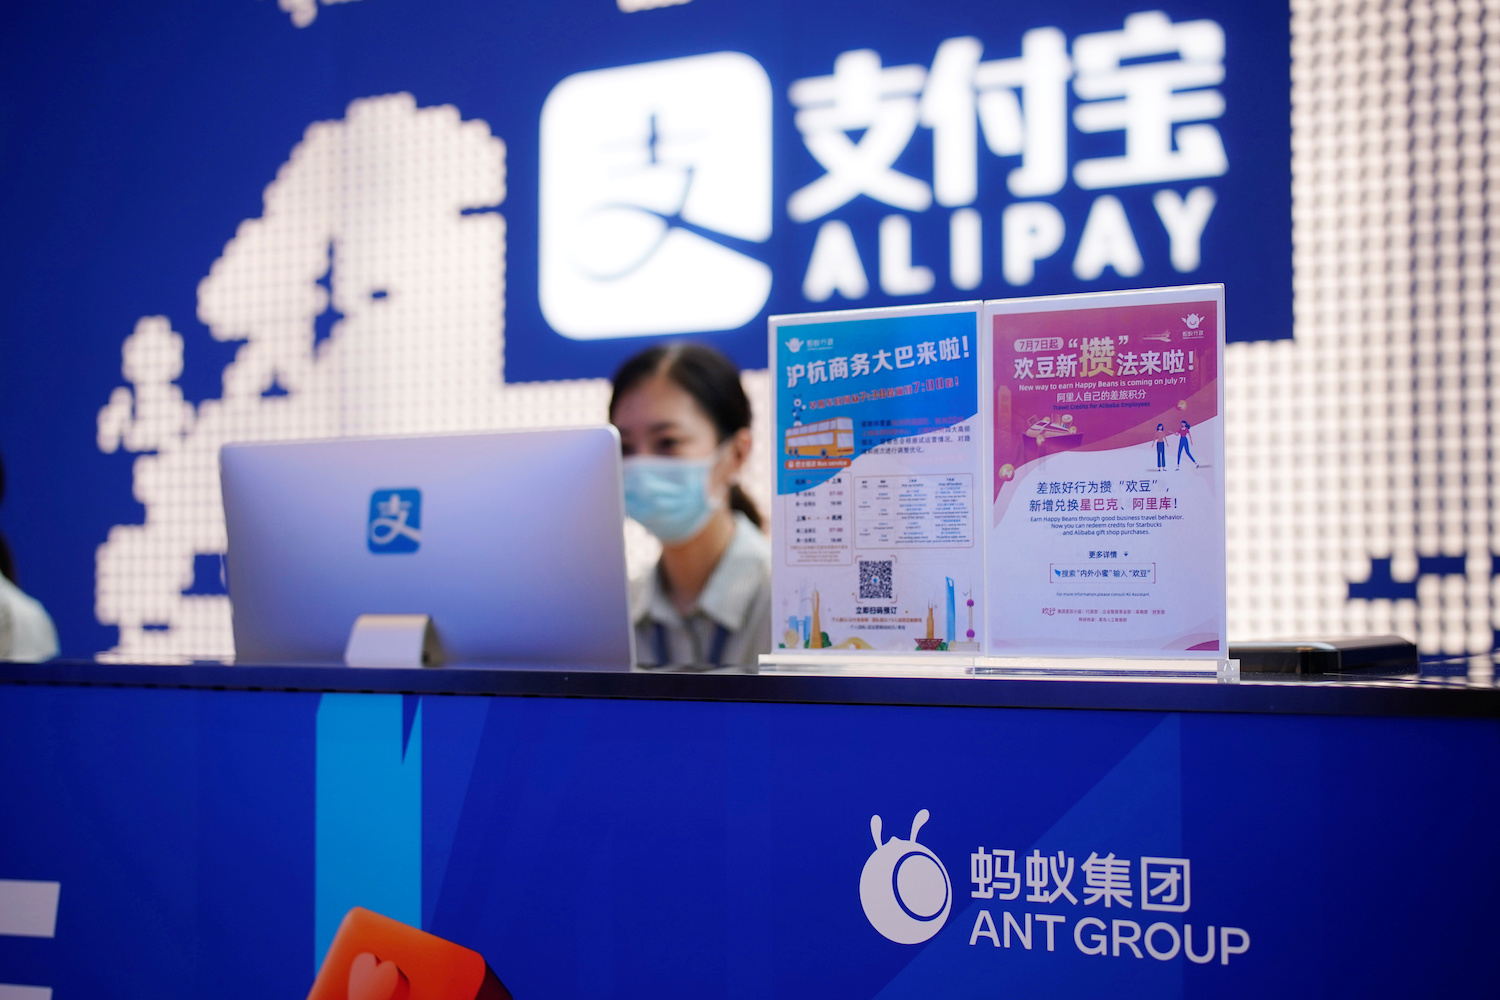 Ant Group logo is pictured at the Shanghai office of Alipay, owned by Ant Group which is an affiliate of Chinese e-commerce giant Alibaba, in Shanghai, China